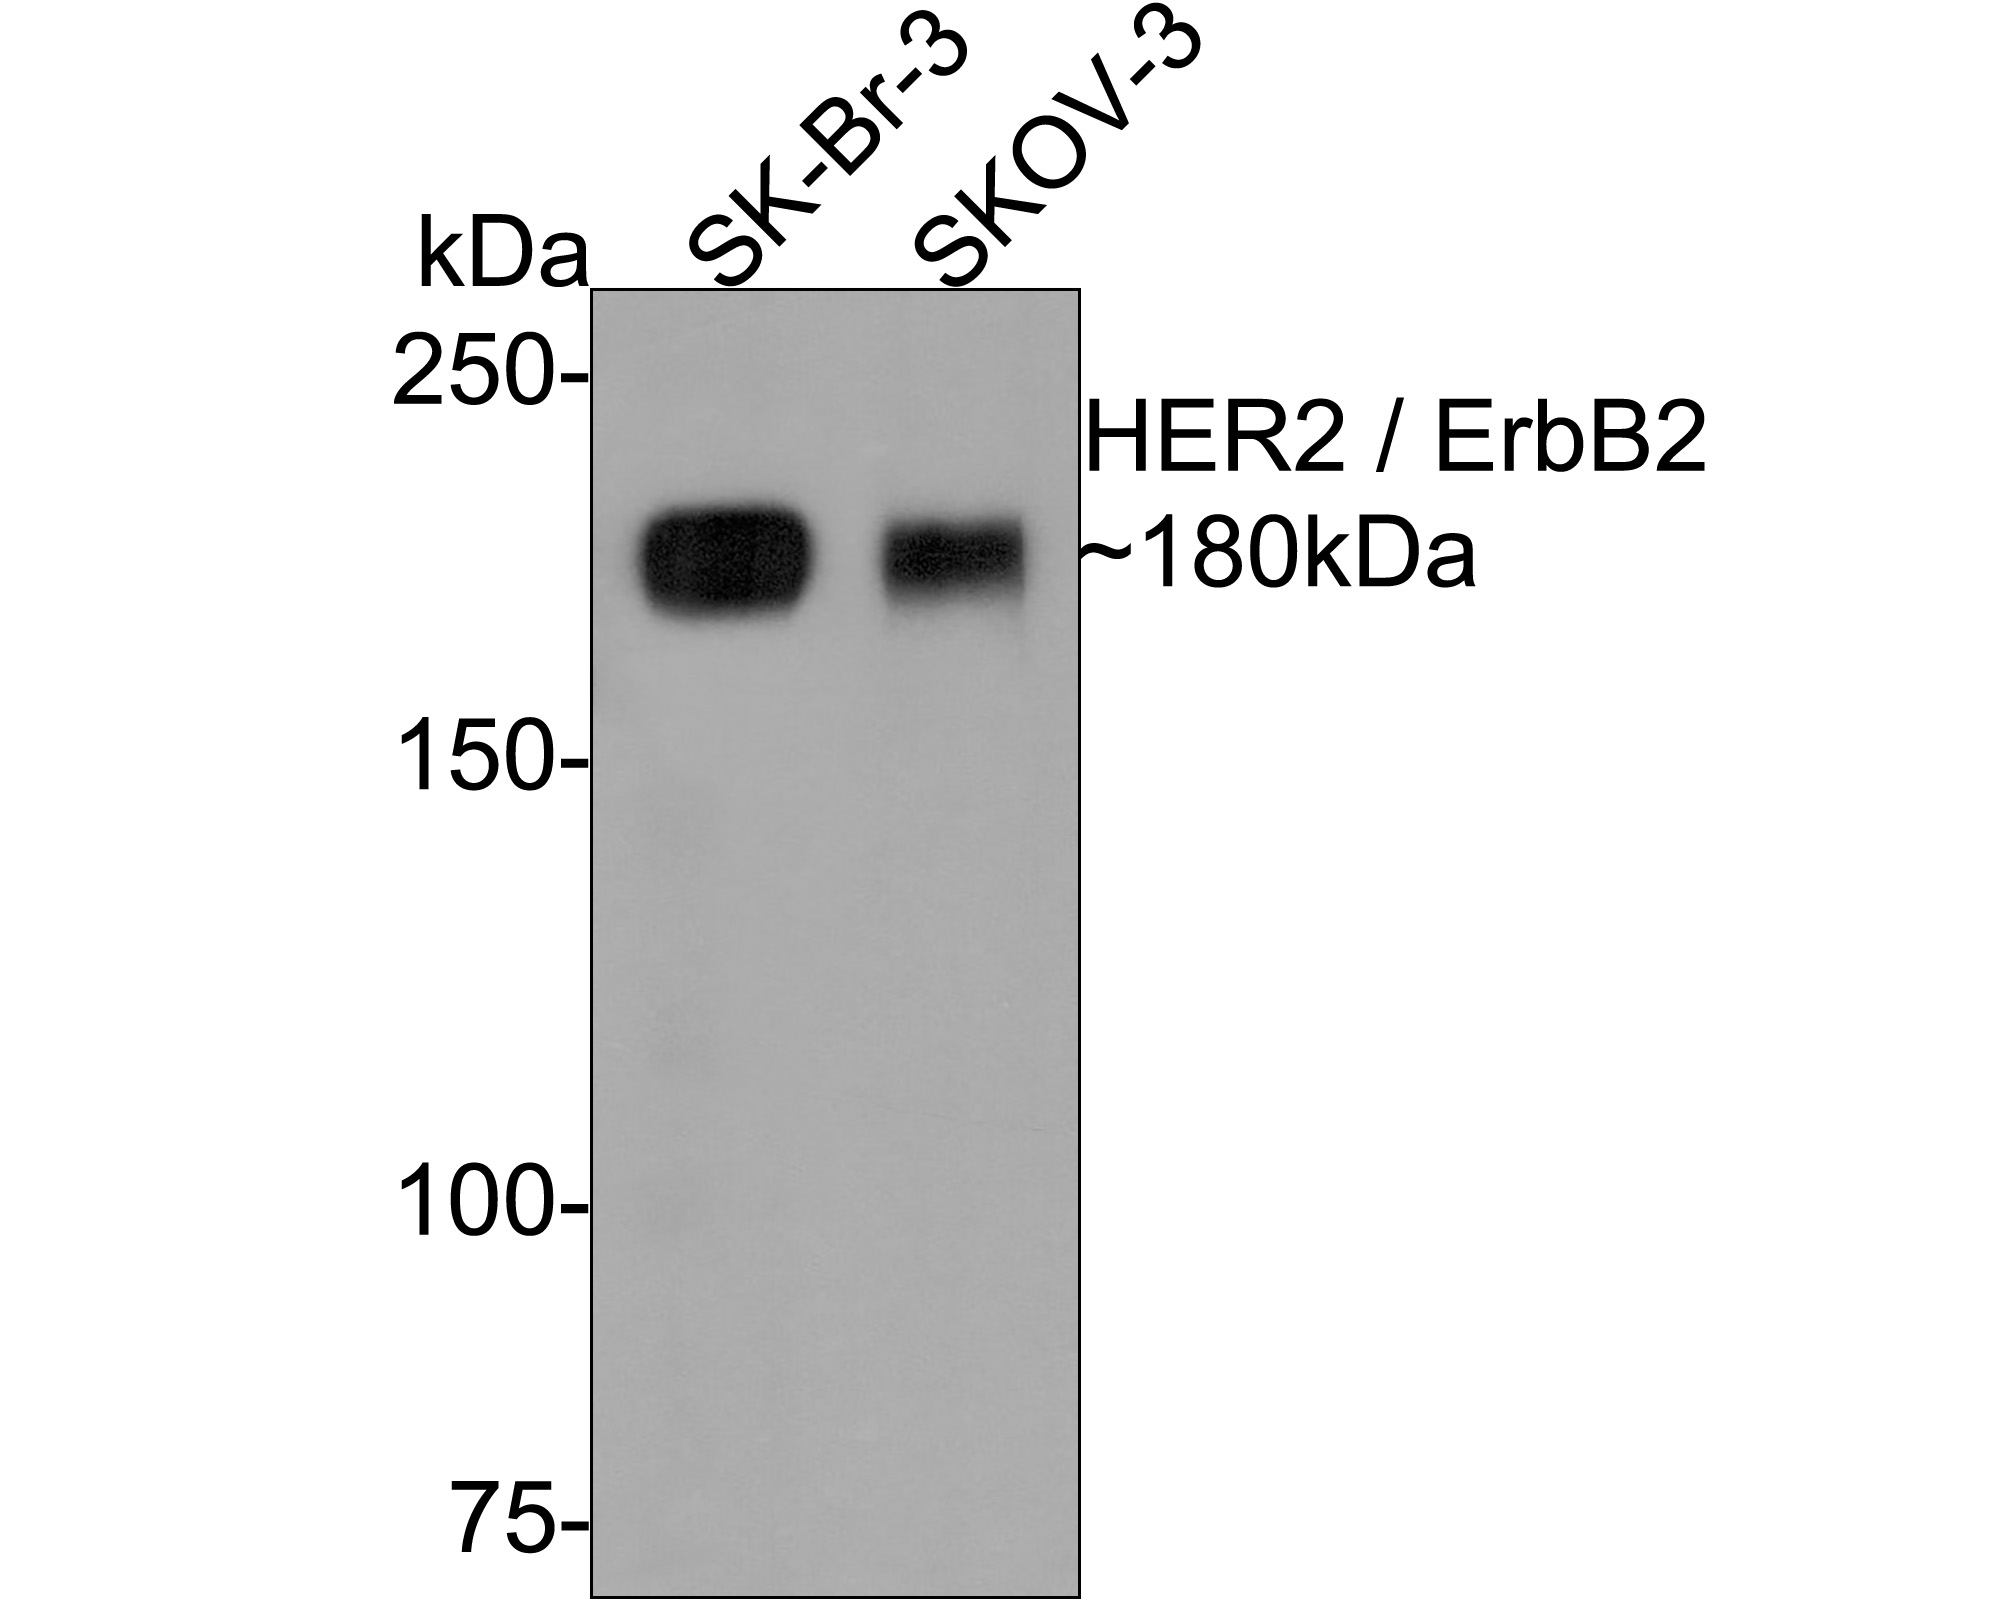 Western blot analysis of HER2 / ErbB2 on different lysates. Proteins were transferred to a PVDF membrane and blocked with 5% BSA in PBS for 1 hour at room temperature. The primary antibody (ER0106, 1/500) was used in 5% BSA at room temperature for 2 hours. Goat Anti-Rabbit IgG - HRP Secondary Antibody (HA1001) at 1:5,000 dilution was used for 1 hour at room temperature.<br />
Positive control: <br />
Lane 1: SK-Br-3 cell lysate<br />
Lane 2: SKOV-3 cell lysate